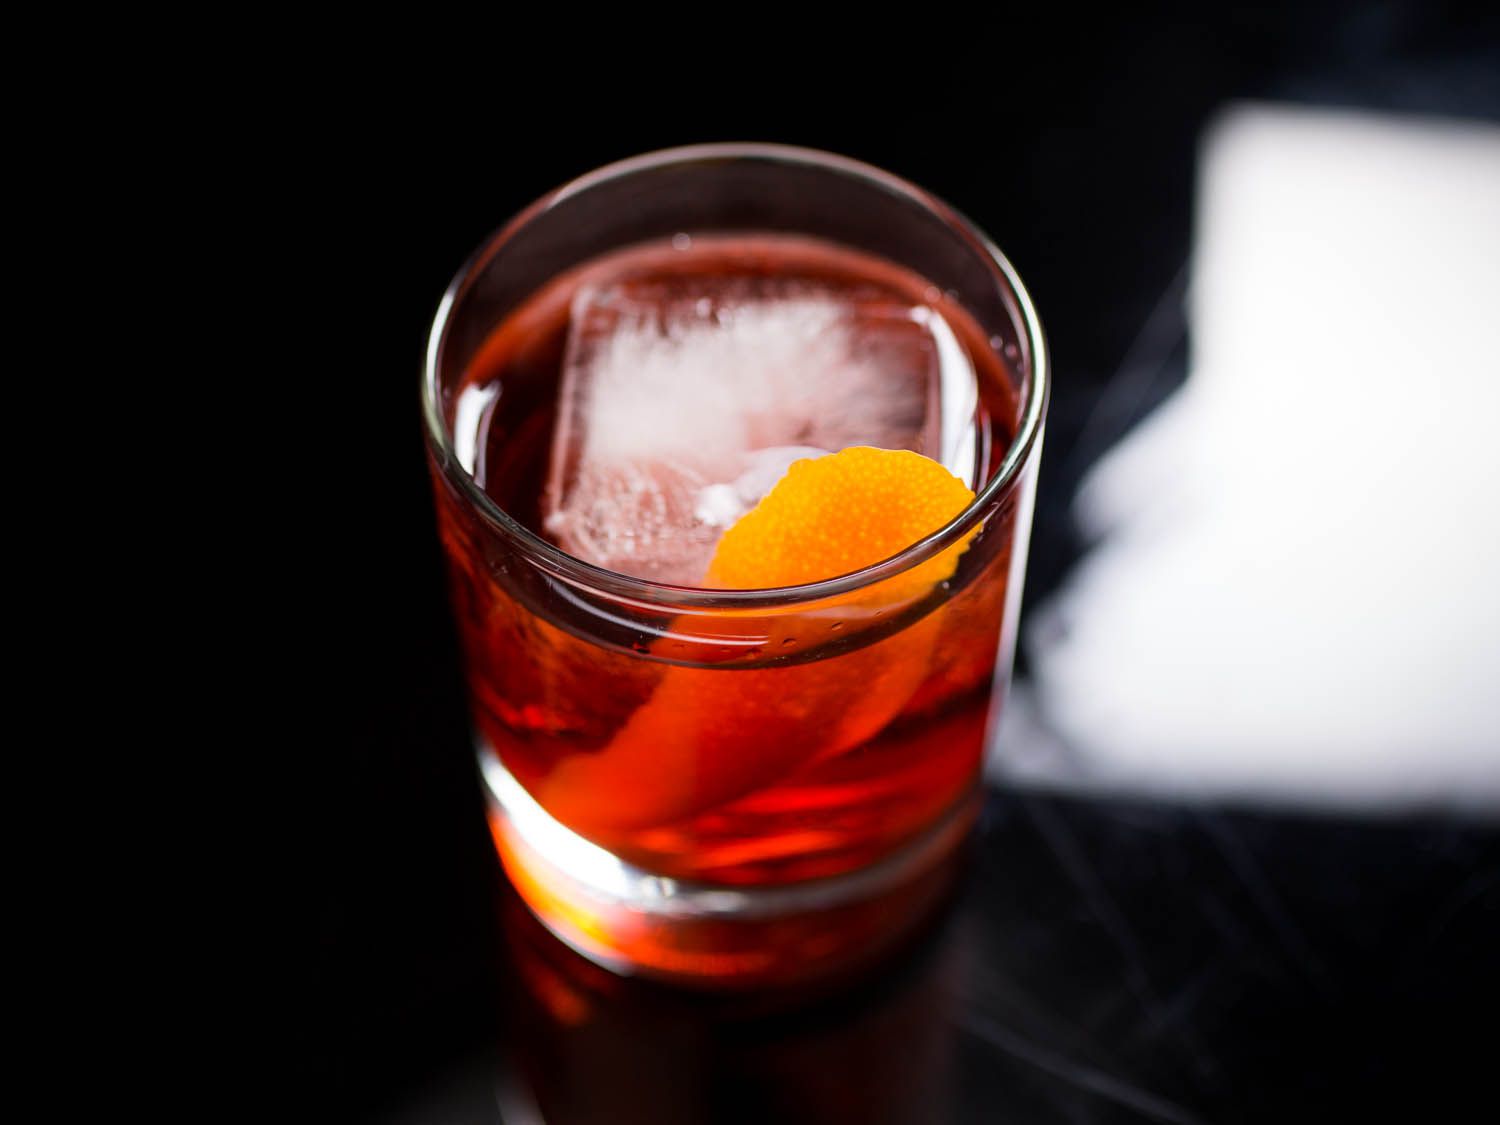 Raise A Toast To The Timeless Bond Of Campari And Negroni Week, Shared By Bartenders And Enjoyed Around The World photo